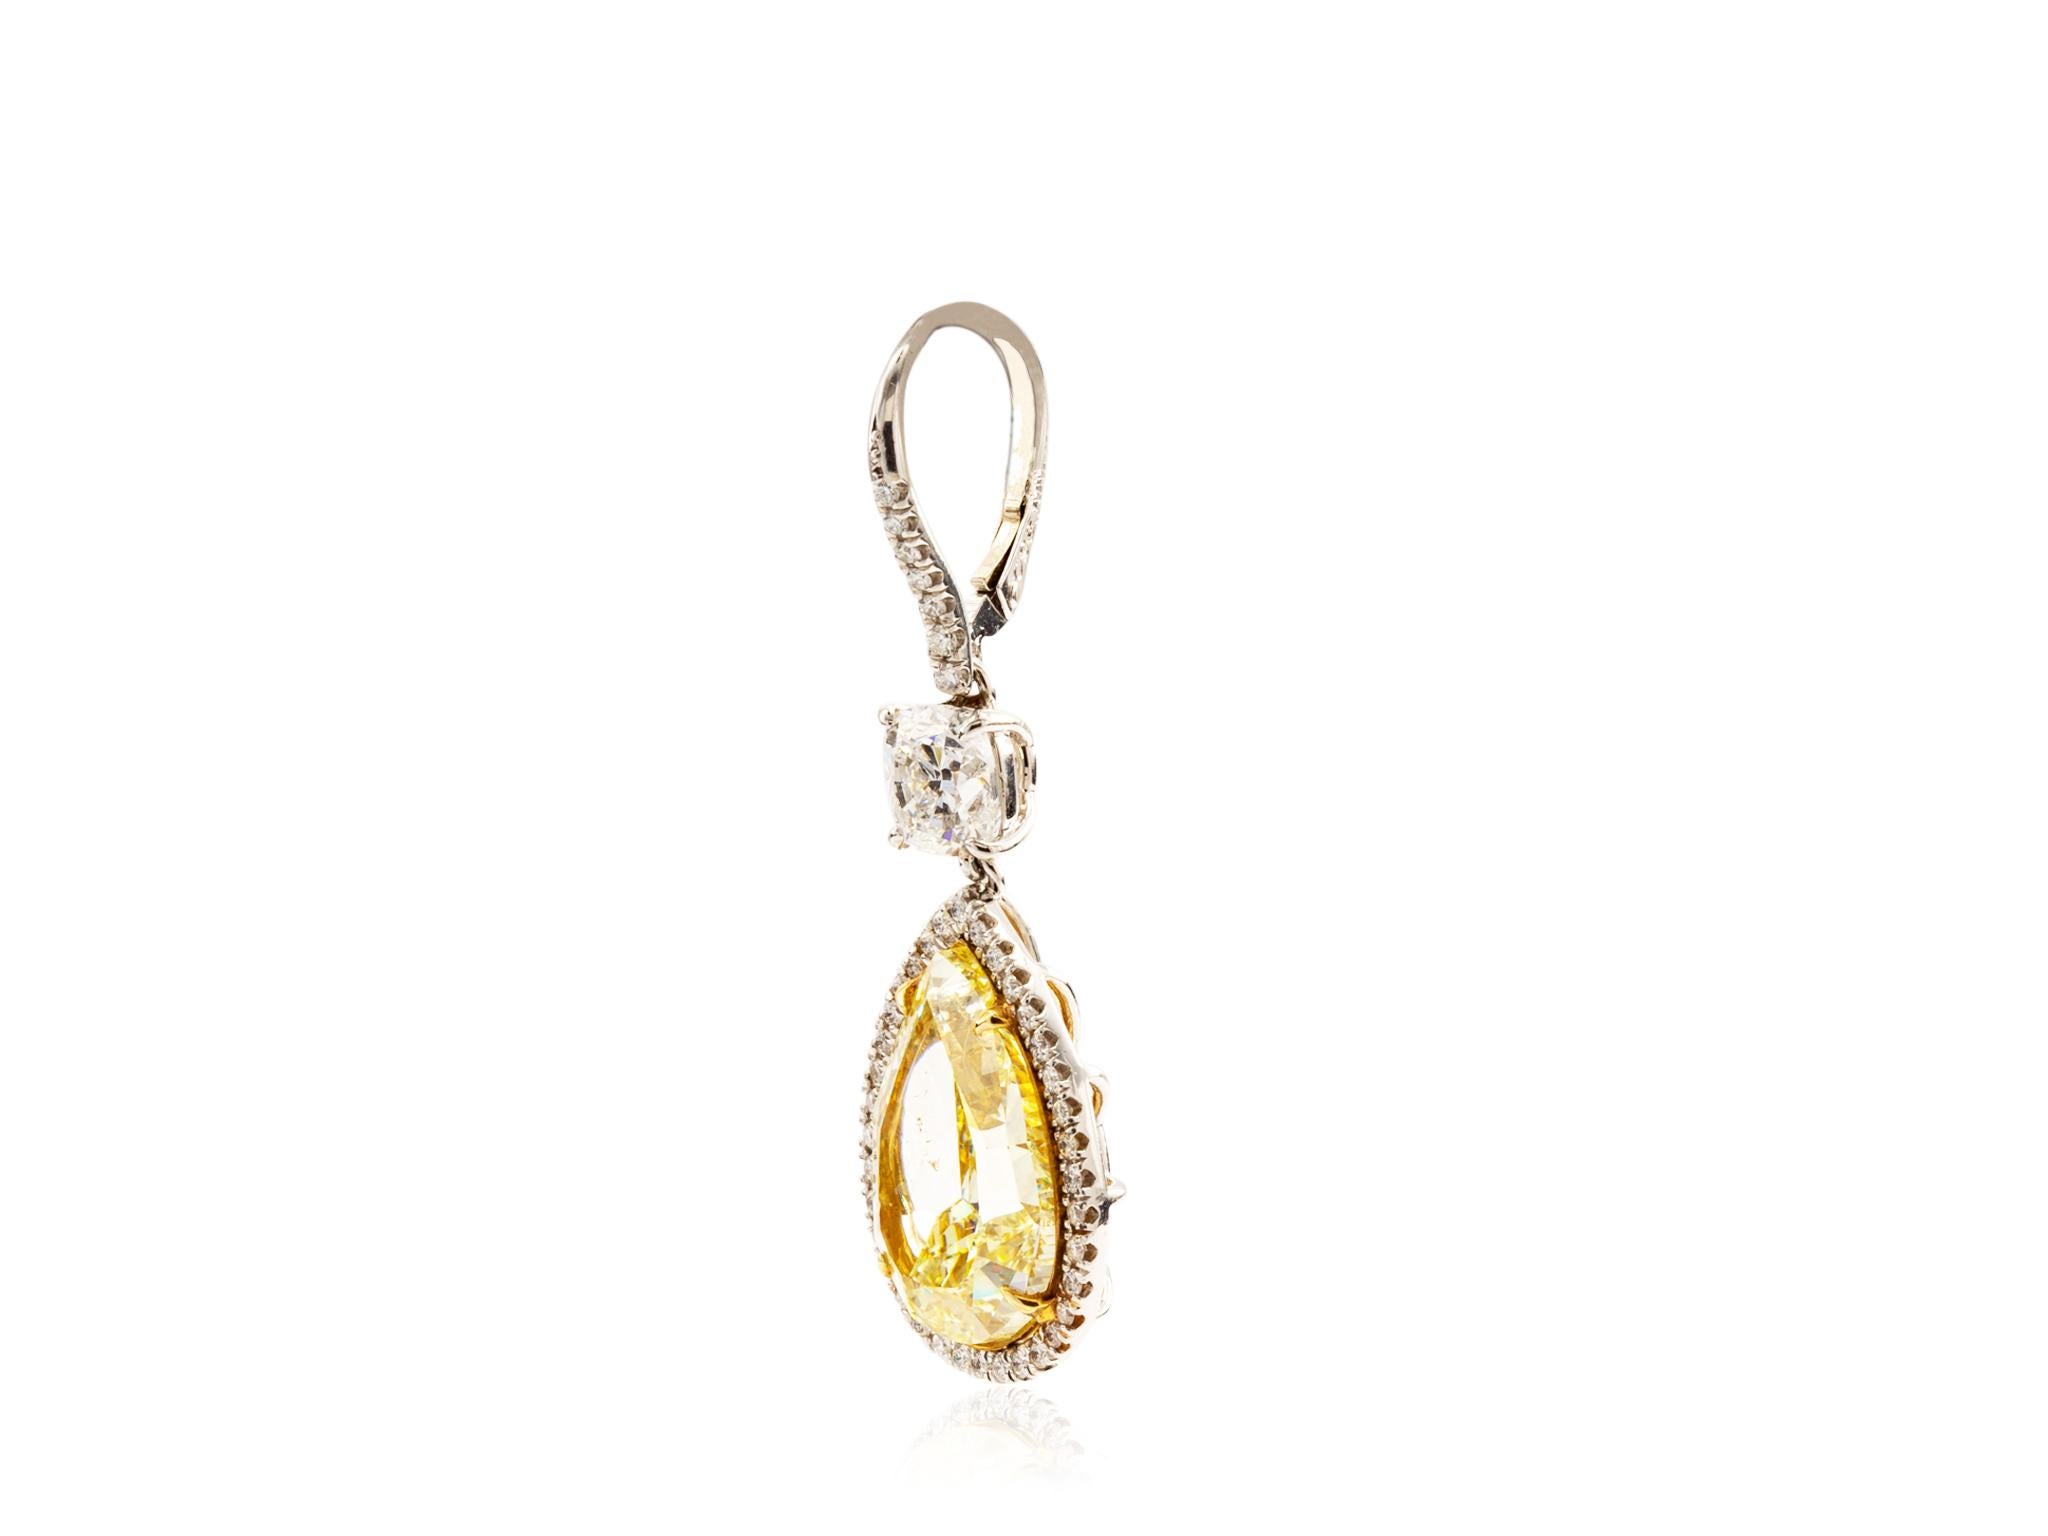 18 karat yellow gold and platinum custom designed by Shreve Crump and Low Canary Yellow Pear Shape Diamond drop earrings. Consisting of 2 PS diamonds weighing 18.09 carats total weight accompanied by GIA certificates FY/SI1 dropping from a pair of